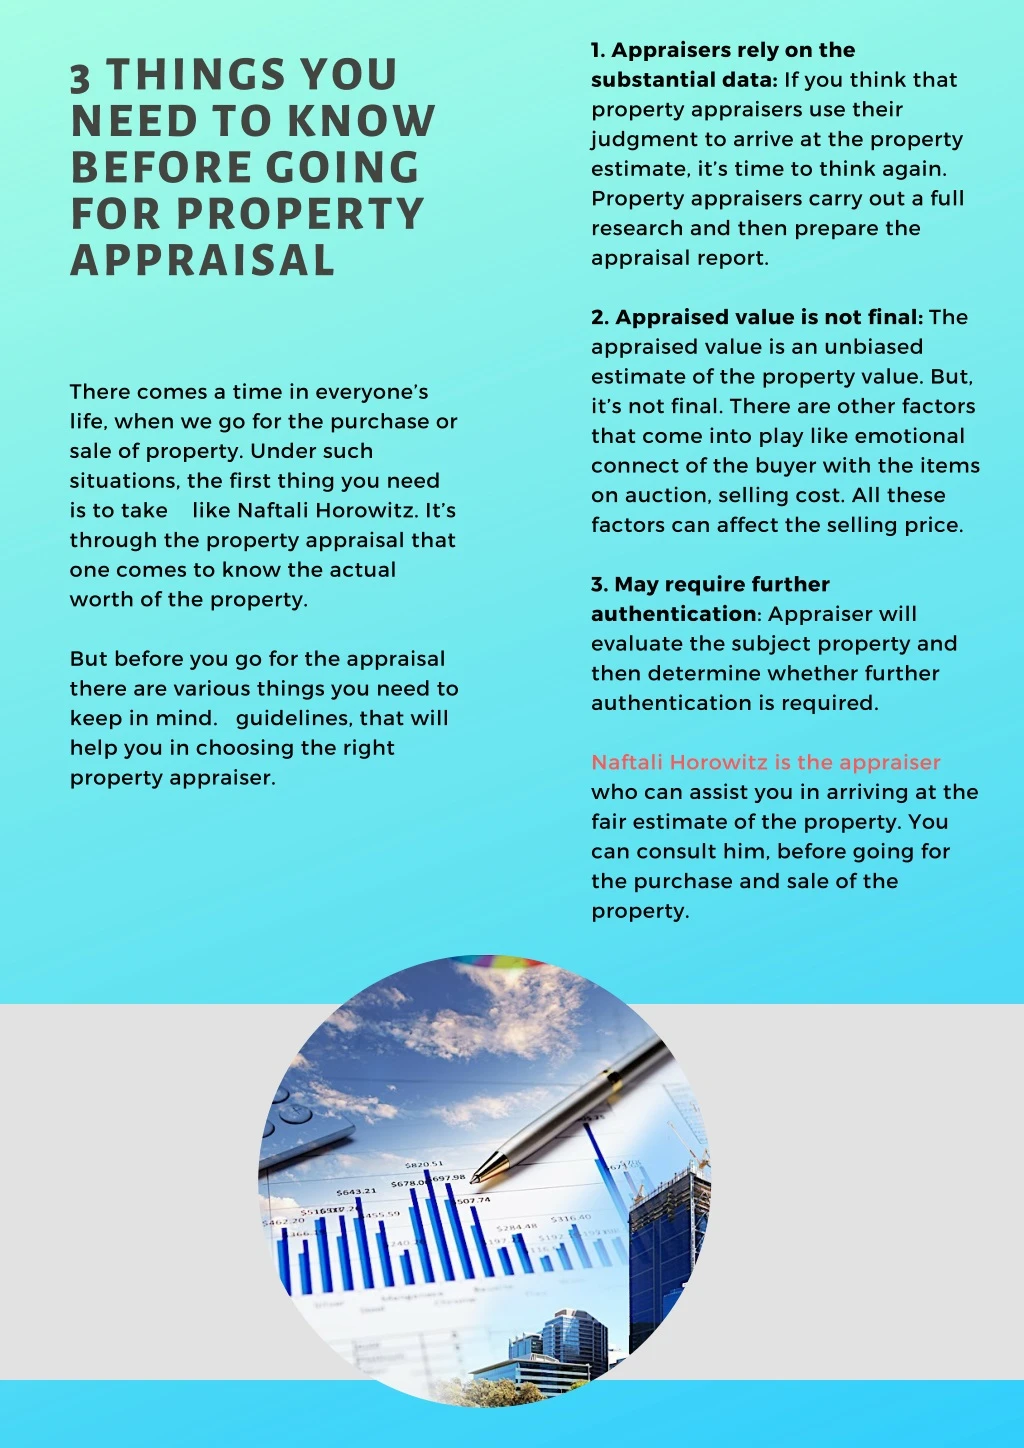 1 appraisers rely on the substantial data